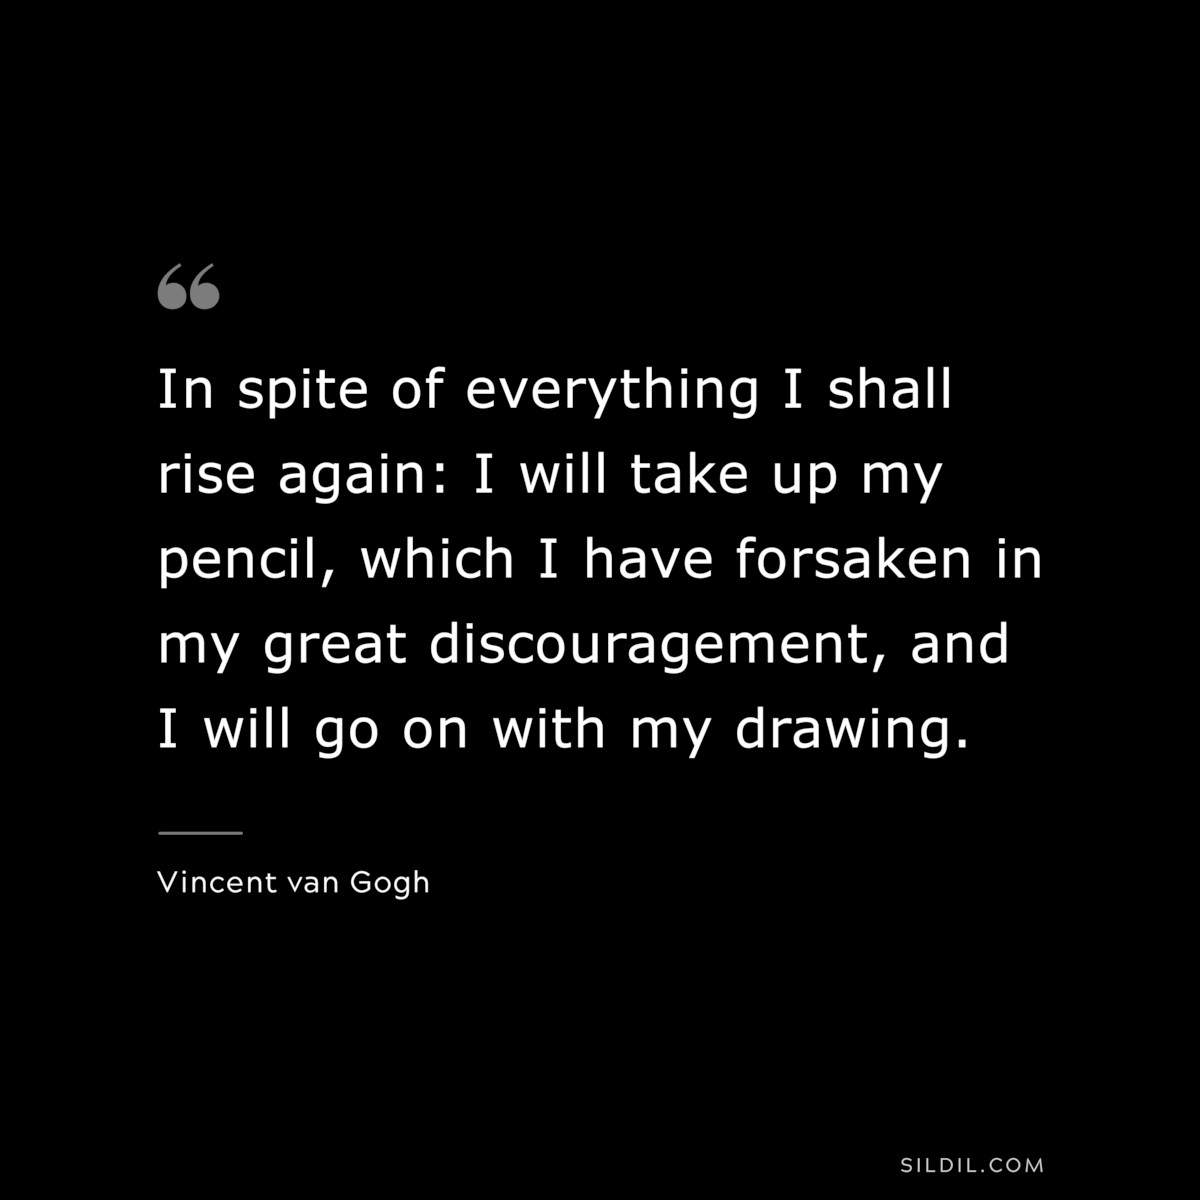 In spite of everything I shall rise again: I will take up my pencil, which I have forsaken in my great discouragement, and I will go on with my drawing. ― Vincent van Gogh